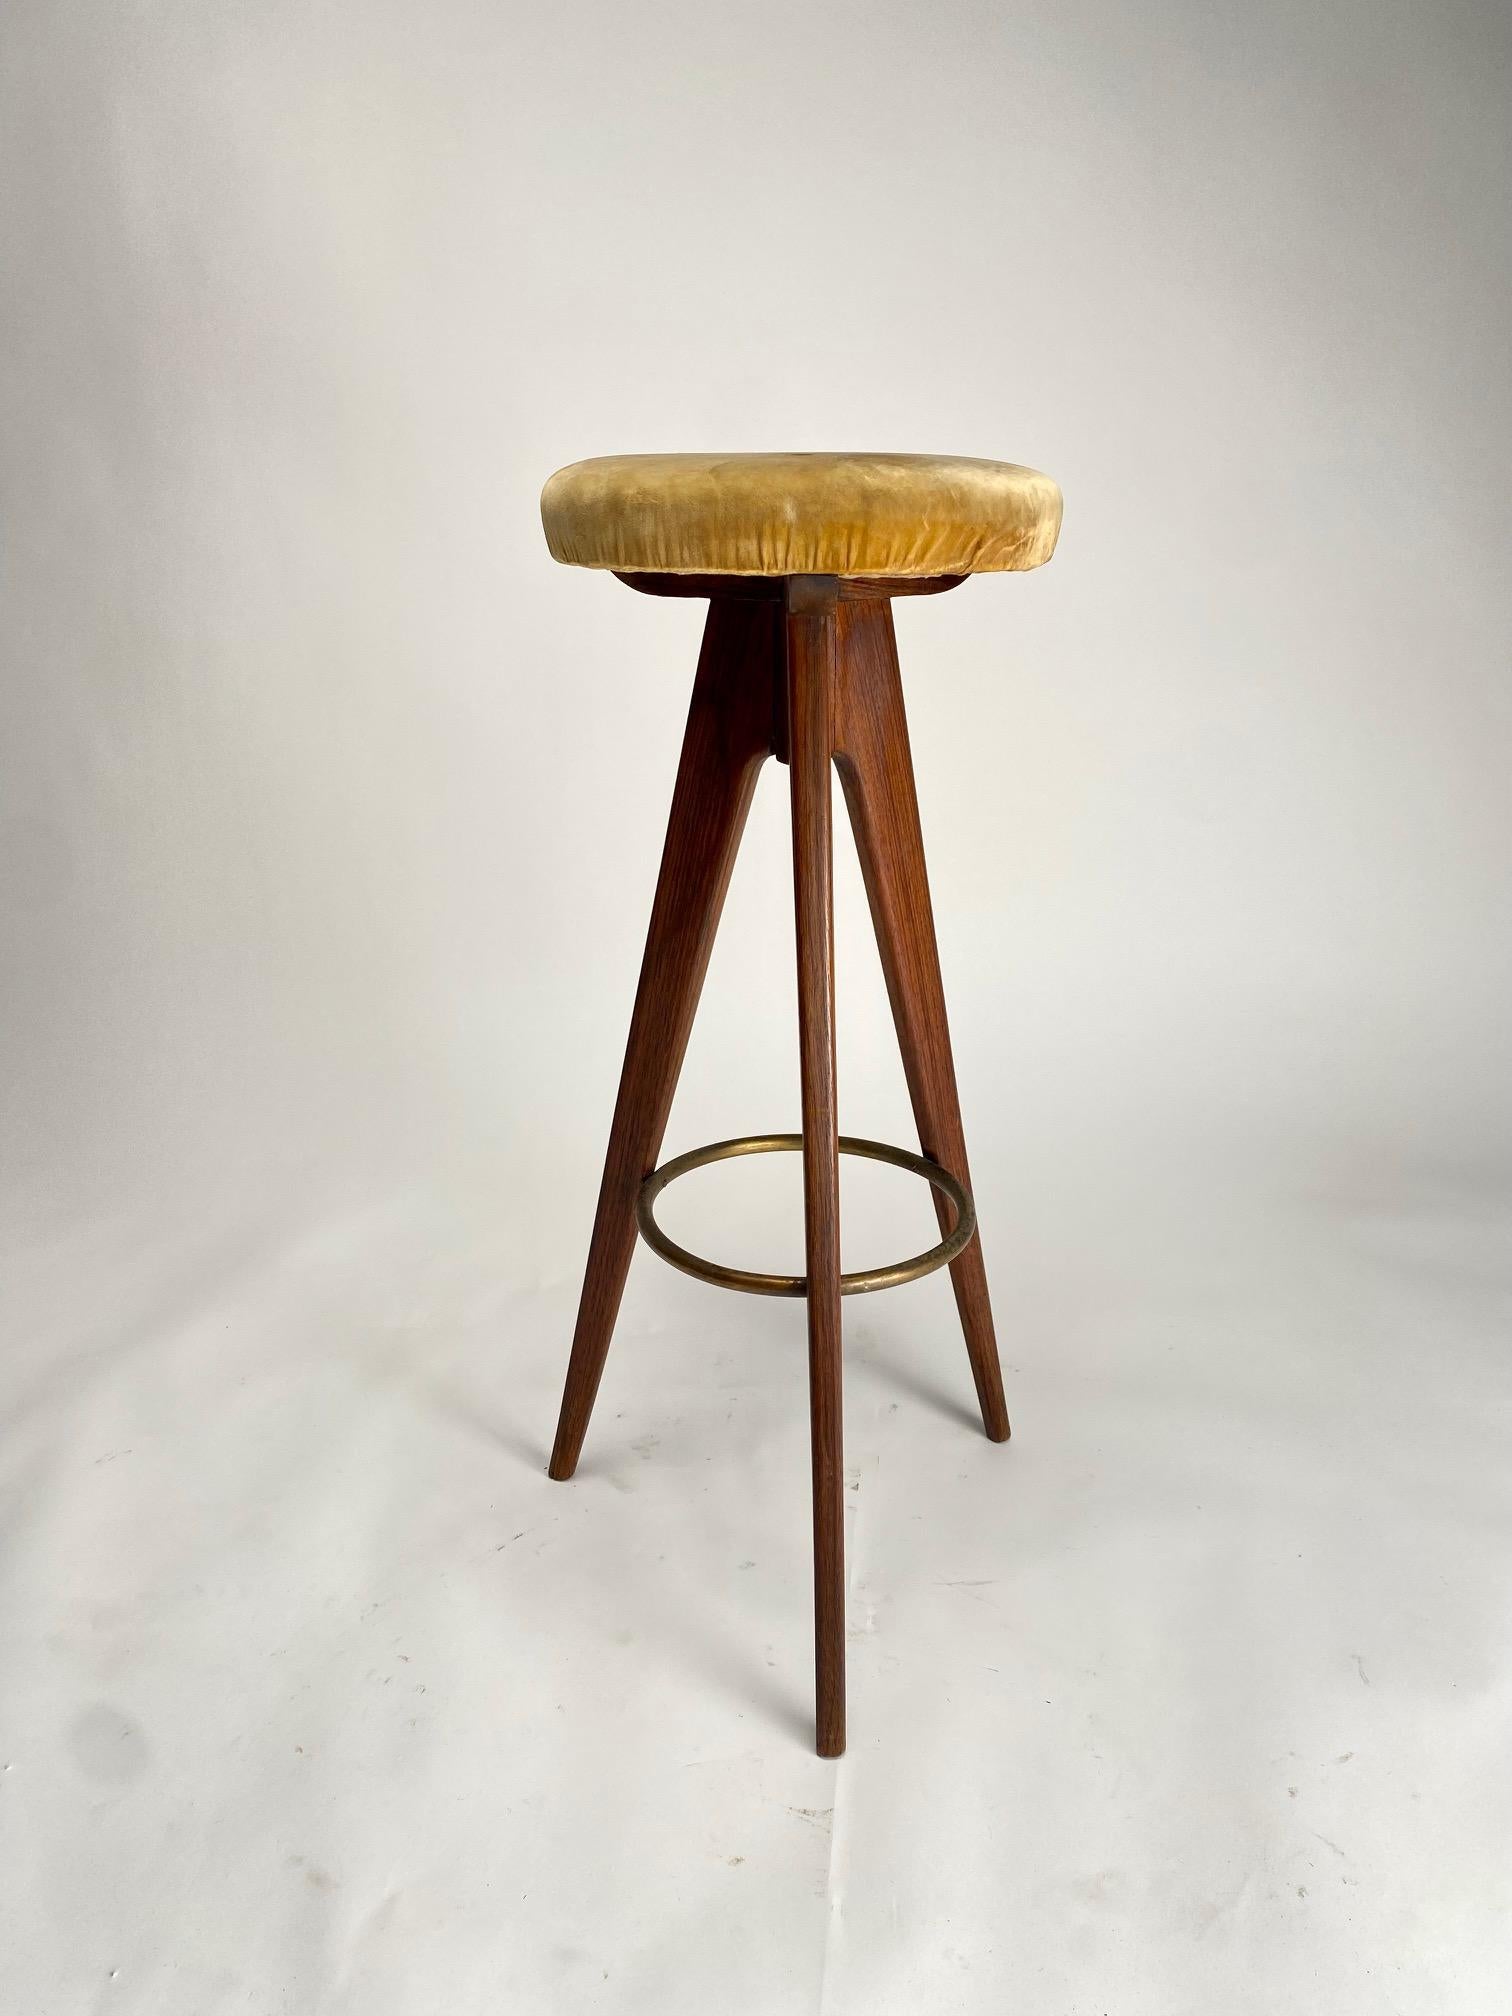 Set of three Mid-Century wood and brass bar stools, in the style of Gio Ponti. Italy, 1950s

The velvet of the seat is the original one, it is stained but can be replaced by our laboratory with a fabric chosen by the customer (included in the price)